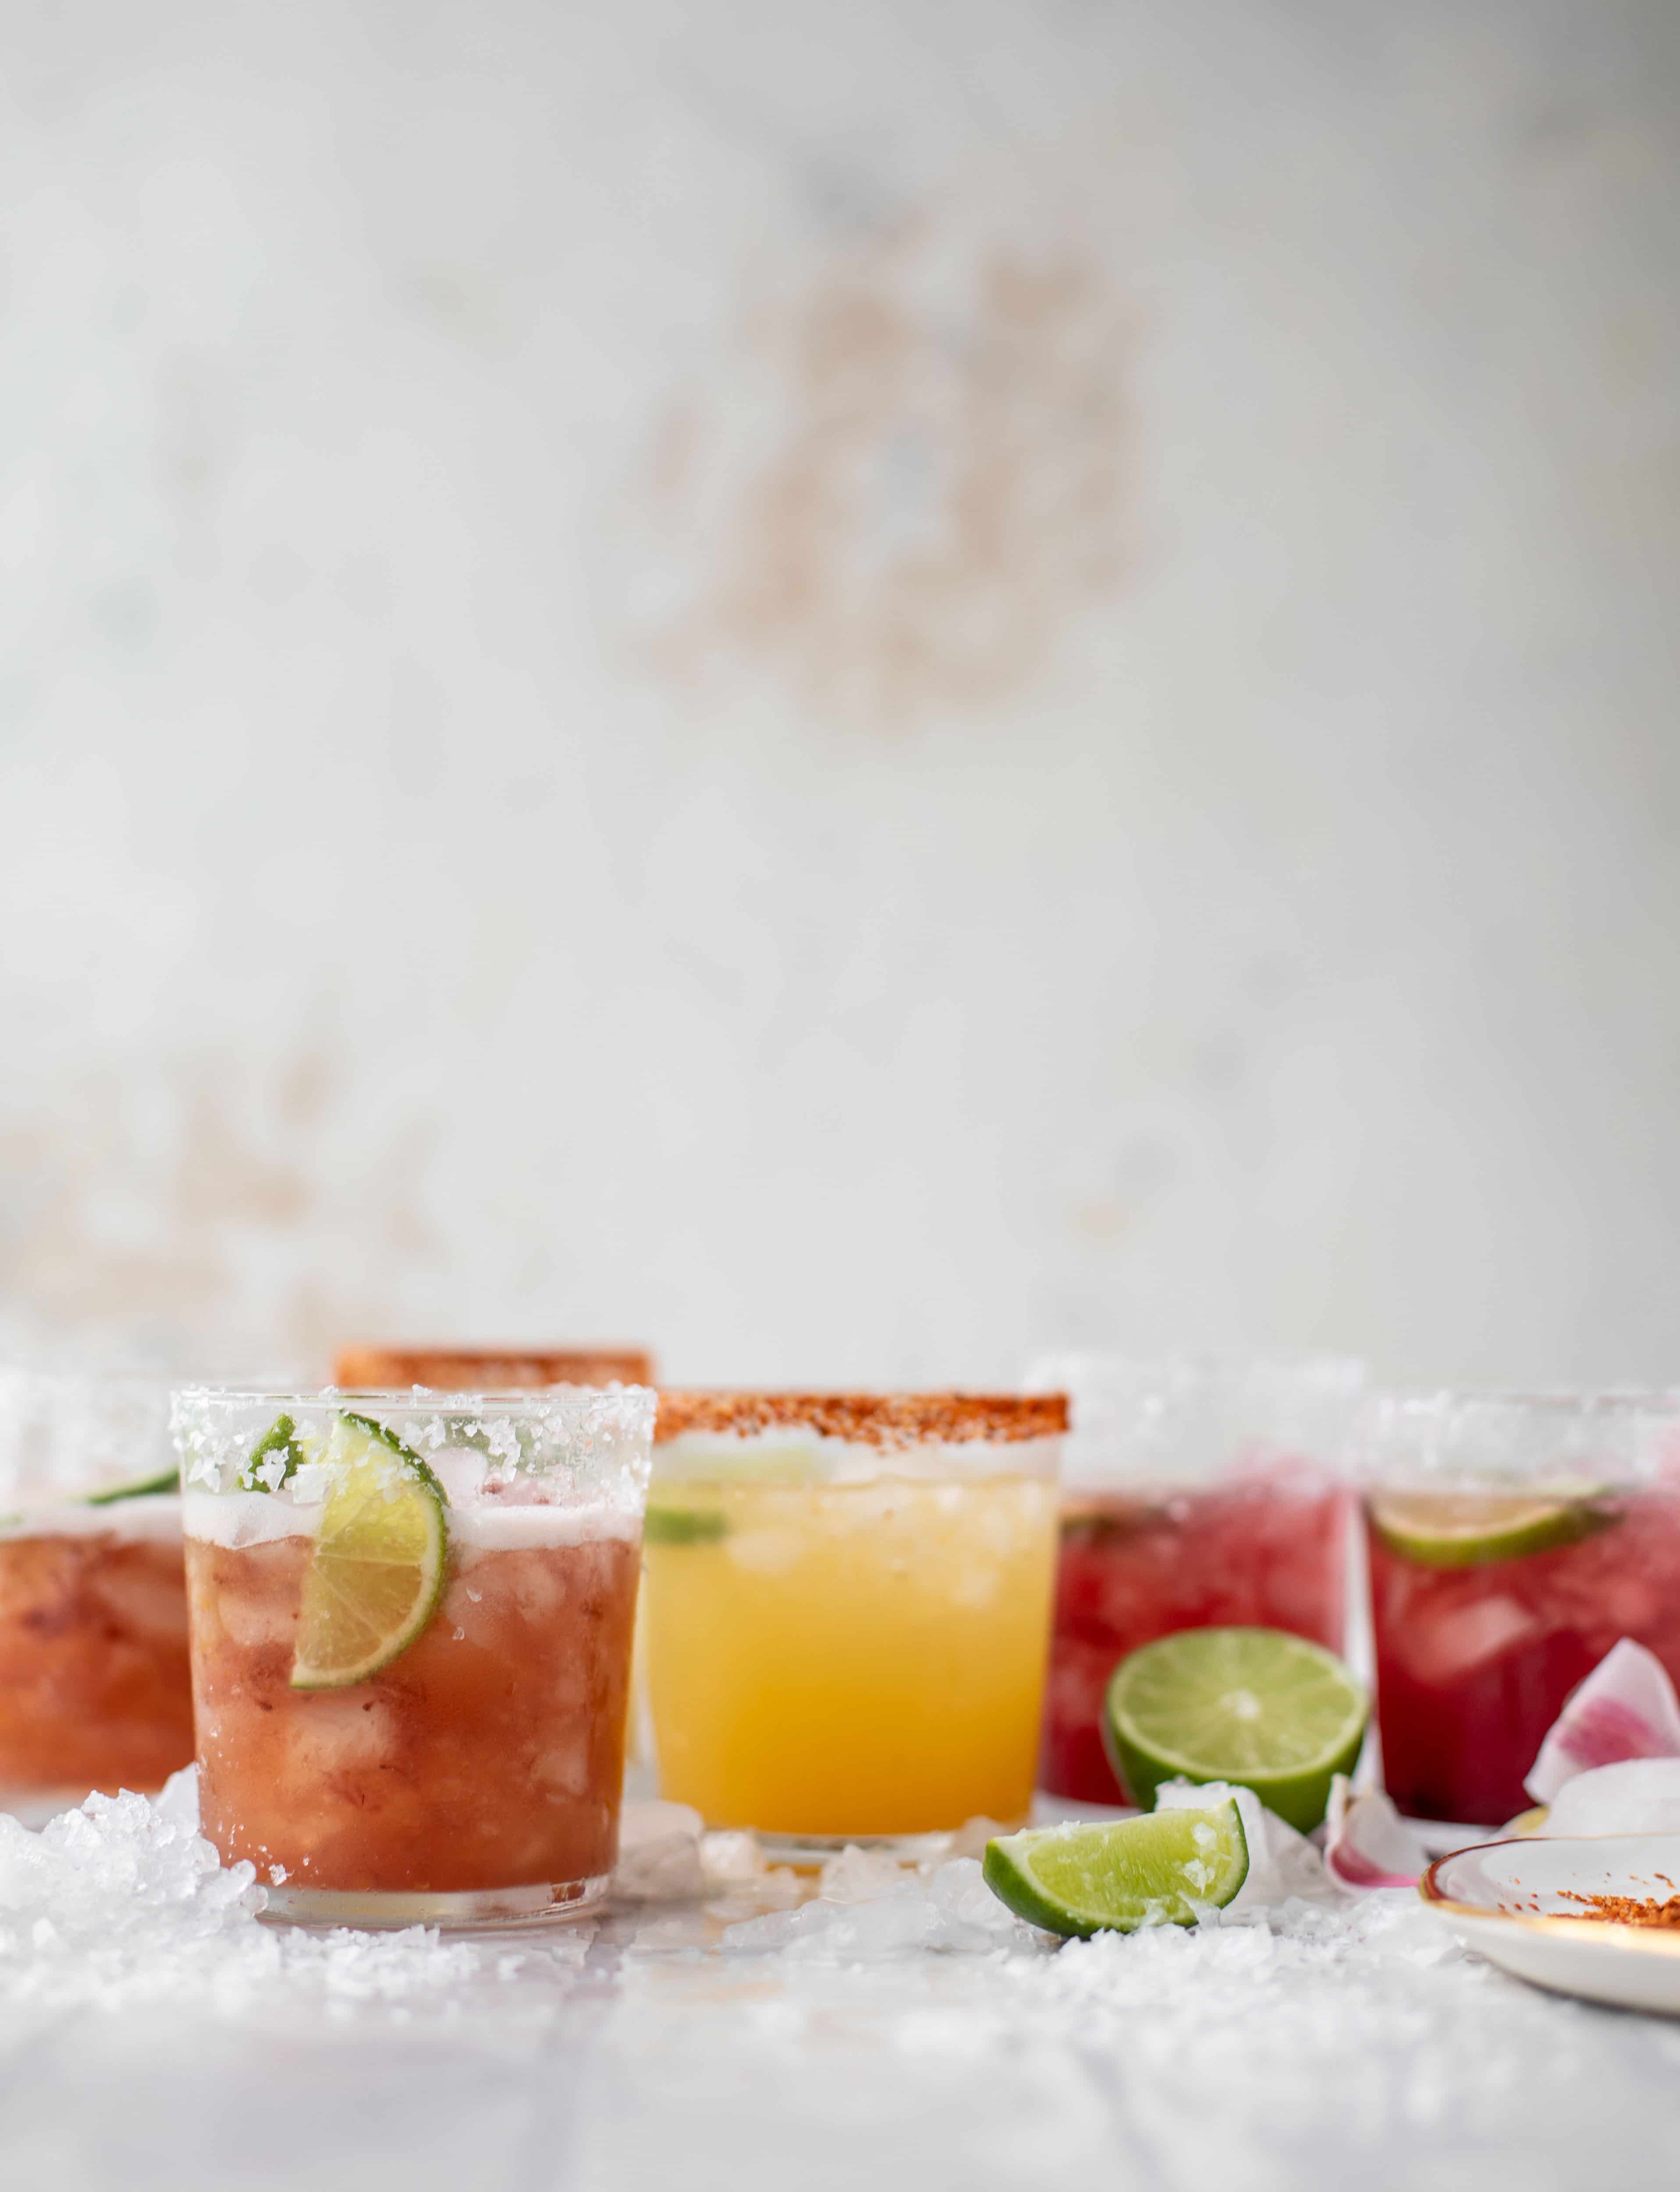 These bubbly jam margaritas are easy and delicious! Use your favorite jam instead of simple syrup to create a fruity flavor everyone will love.